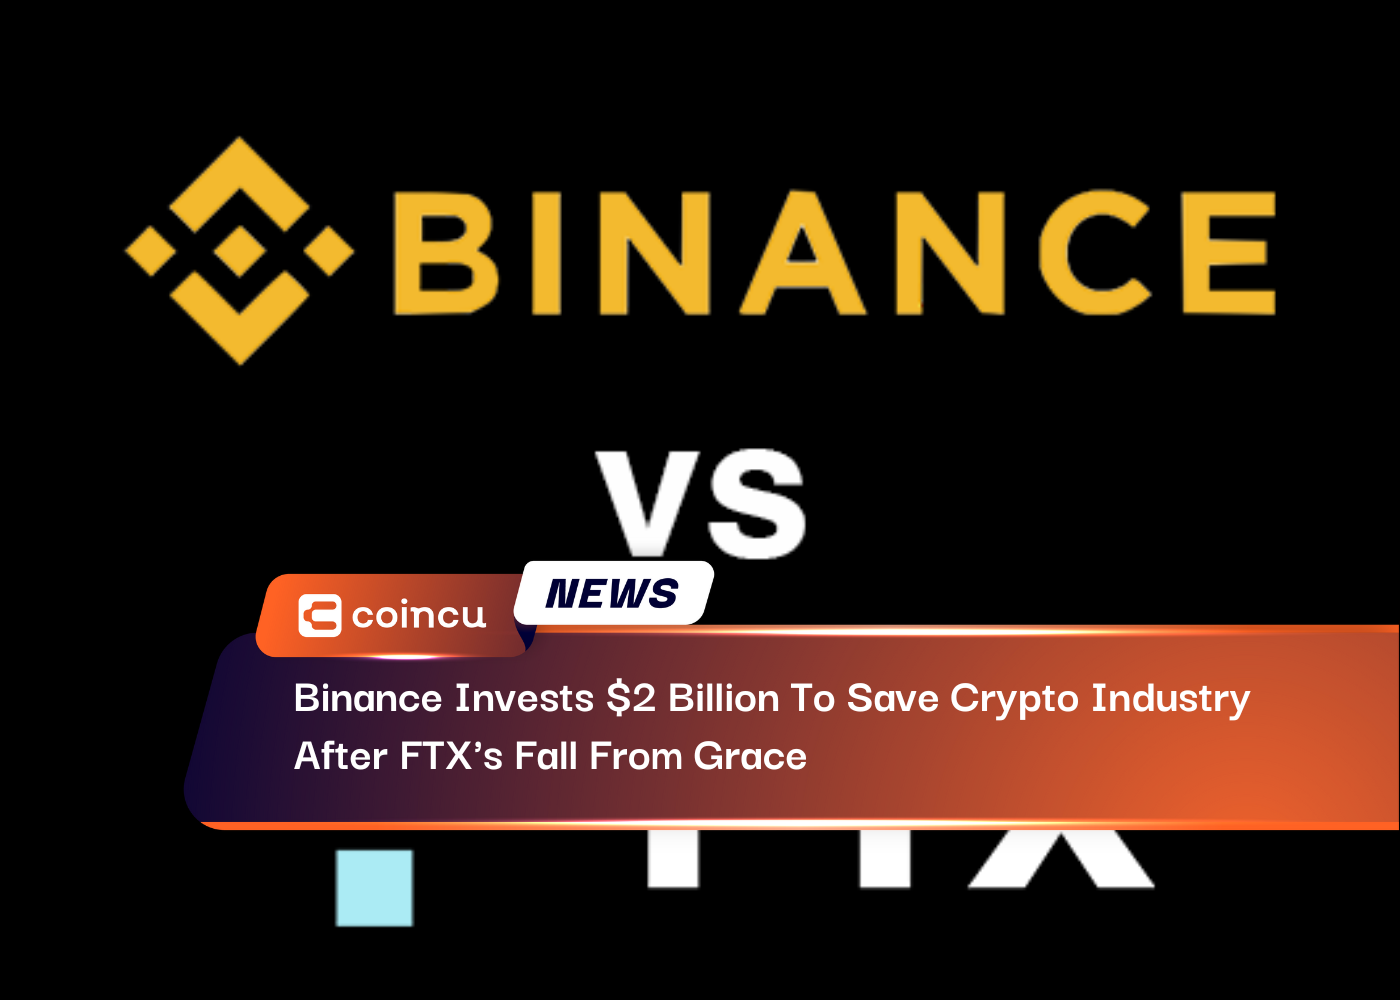 Binance Invests 2 Billion To Save Crypto Industry